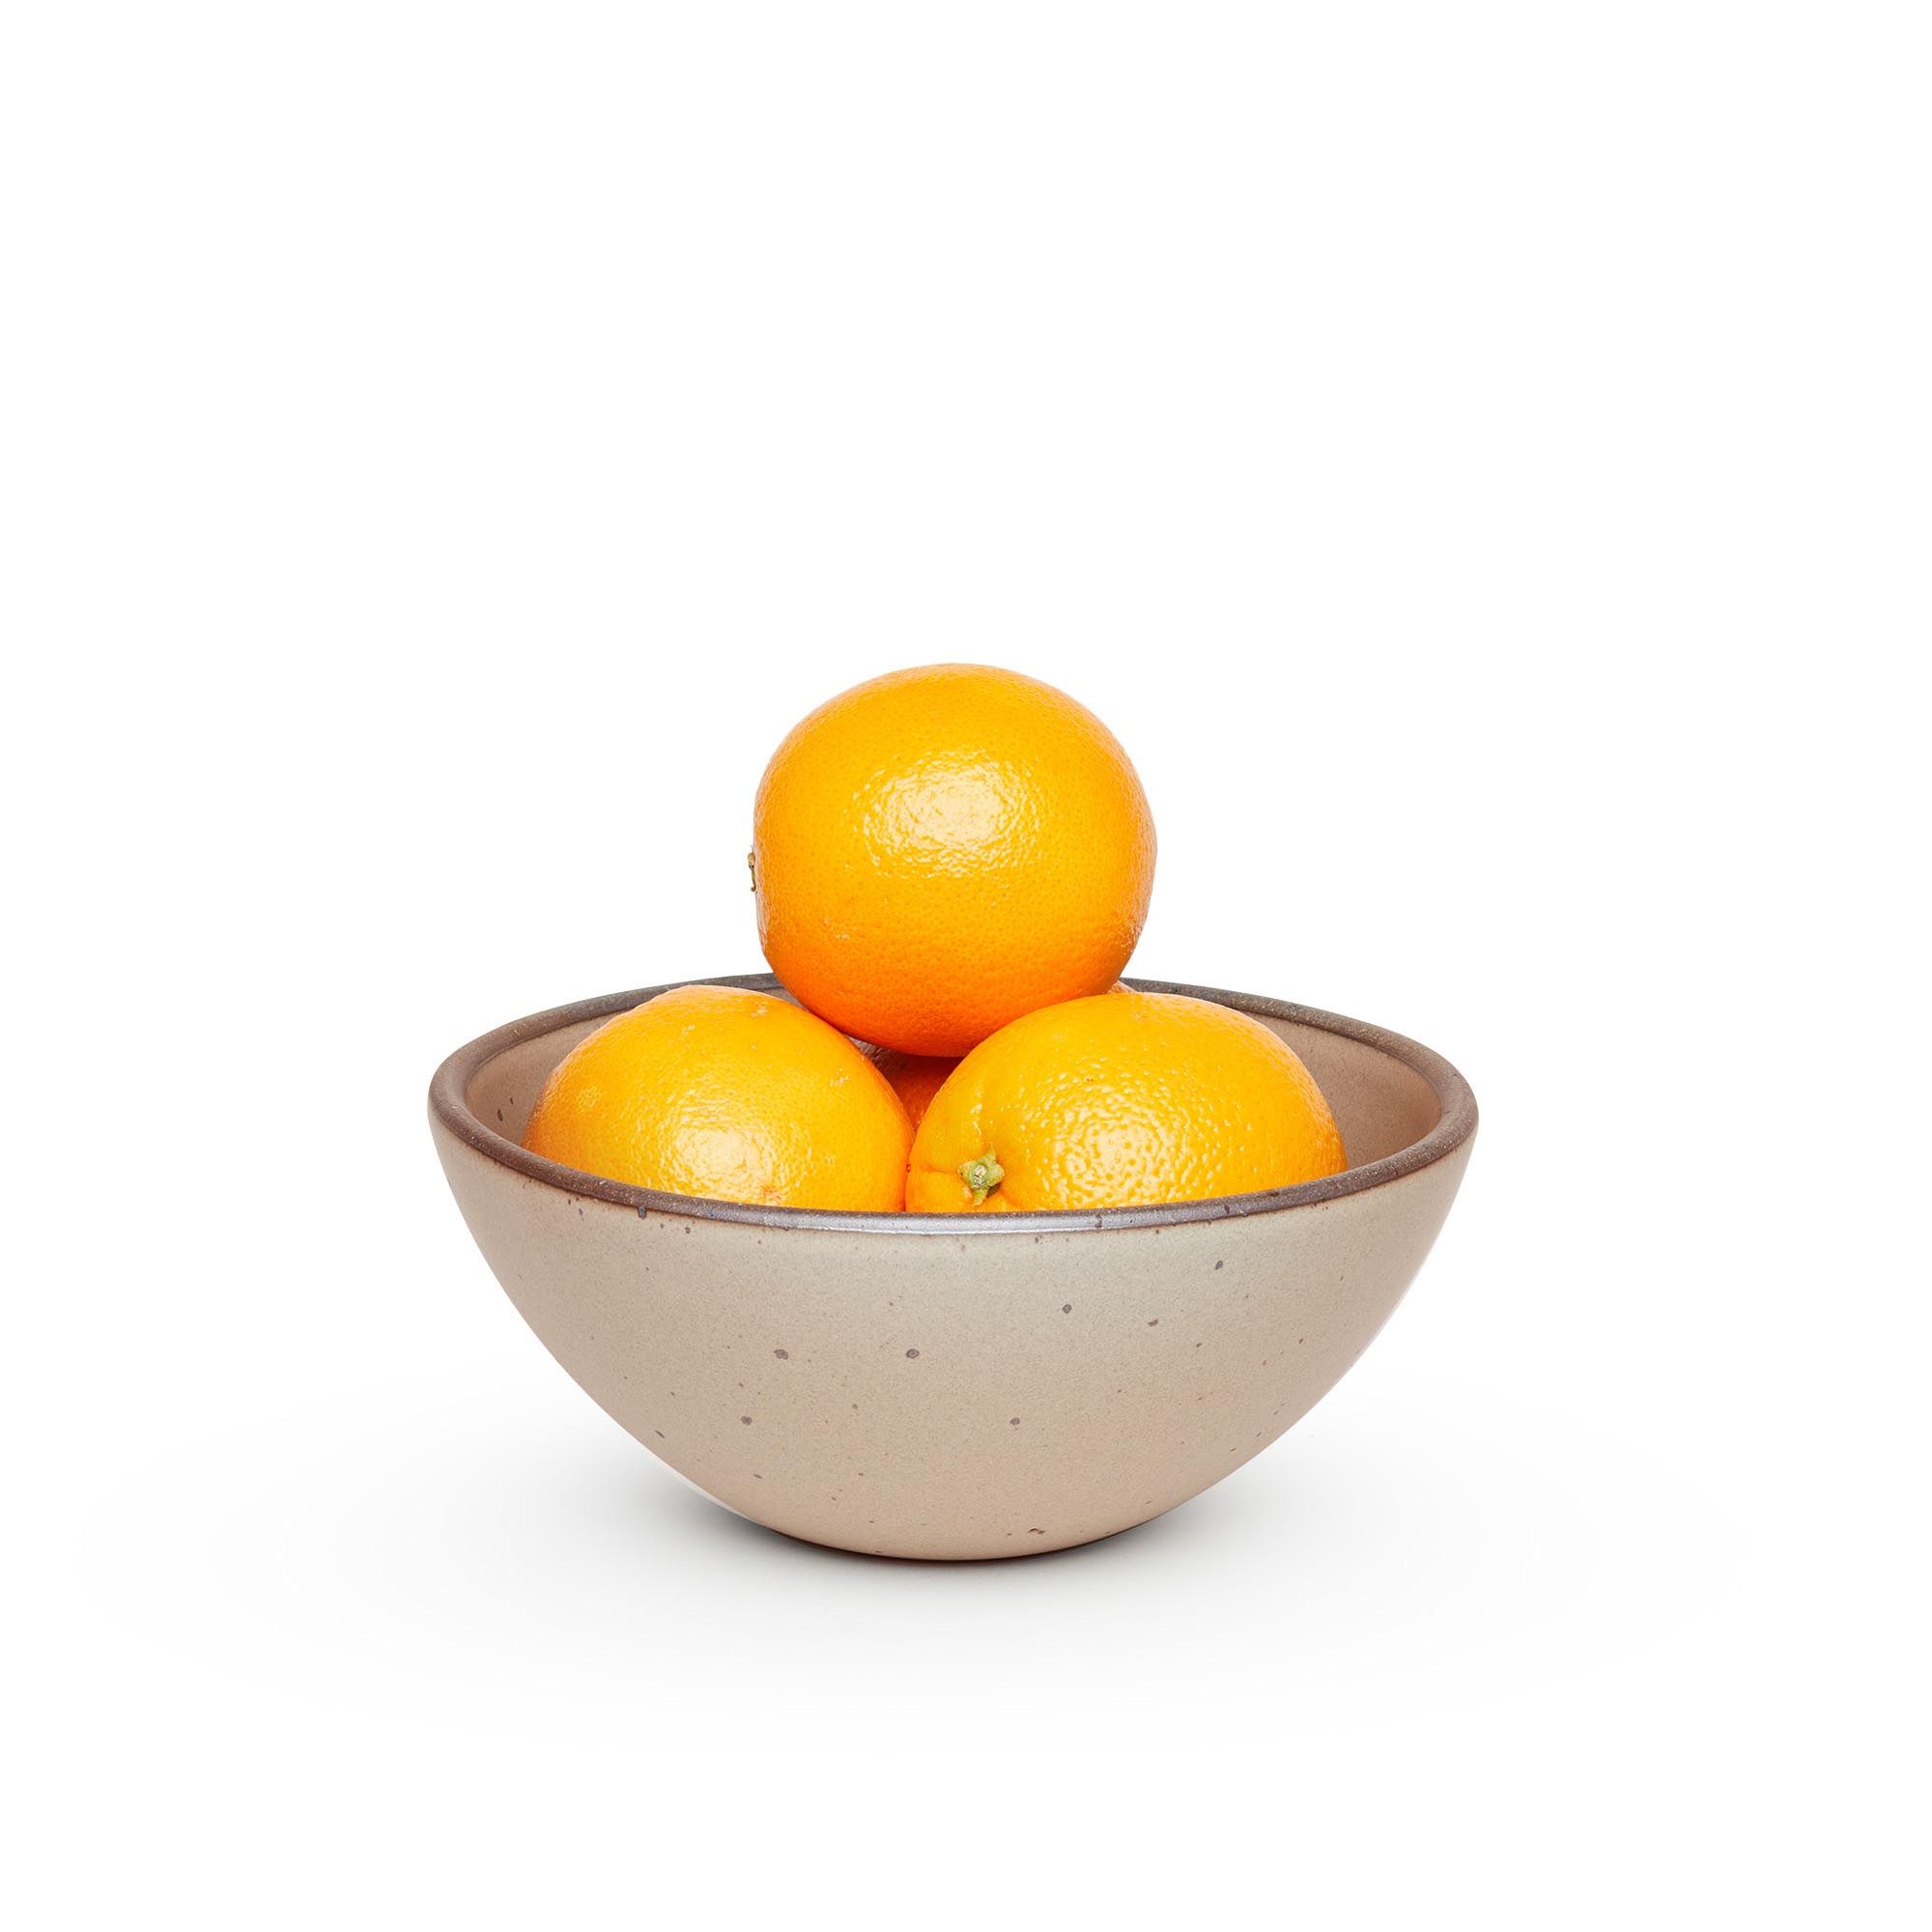 A medium rounded ceramic bowl in a warm pale brown color featuring iron speckles and an unglazed rim, filled with oranges